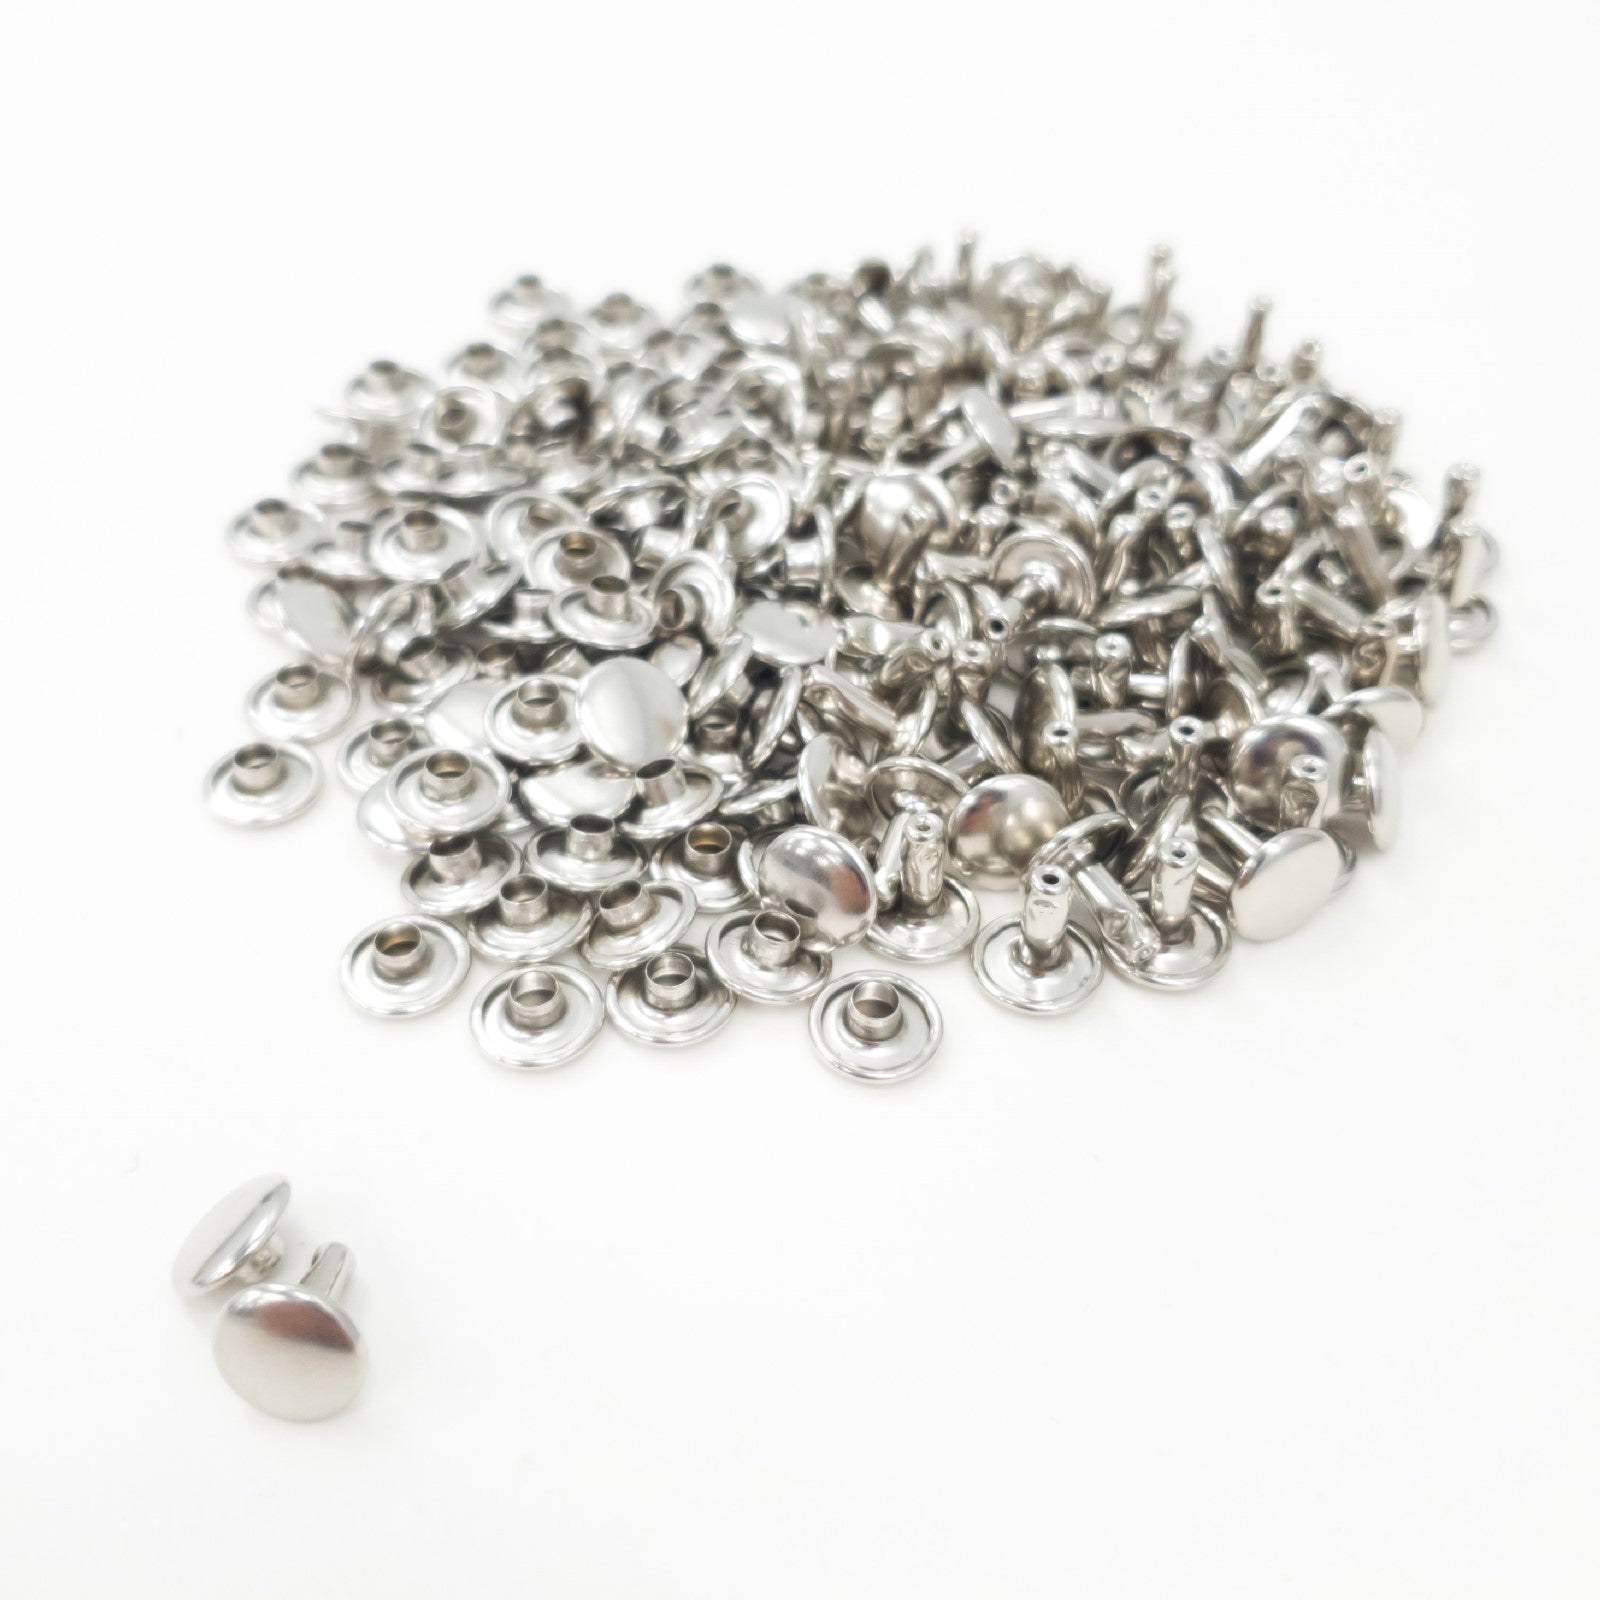 7 MM & 9 MM Double Cap Rivets 100 pk, 3/8 / Nickel | The Leather Guy